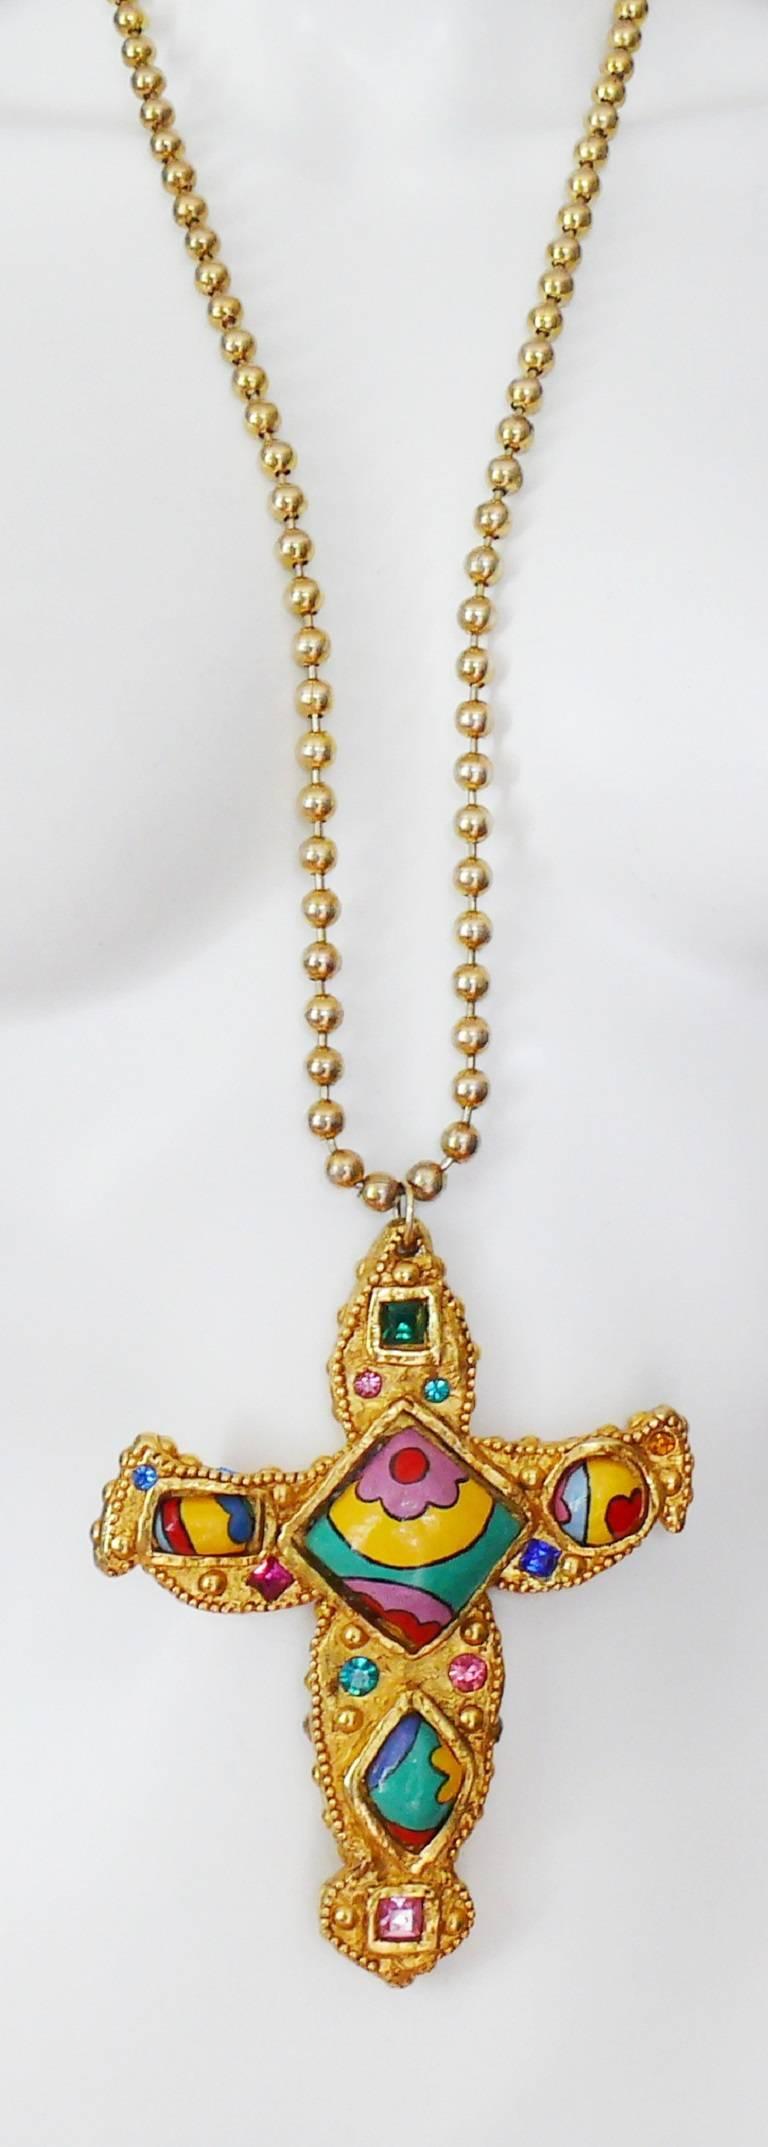 ALEXIS LAHELLEC vintage rare pendant necklace featuring an oversized resin cross embellished with handpainted polychrome abstract design papier-mâché cabochons and multicolored crystals.

Gold toned ball chain.

Marked ALEXIS LAHELLEC